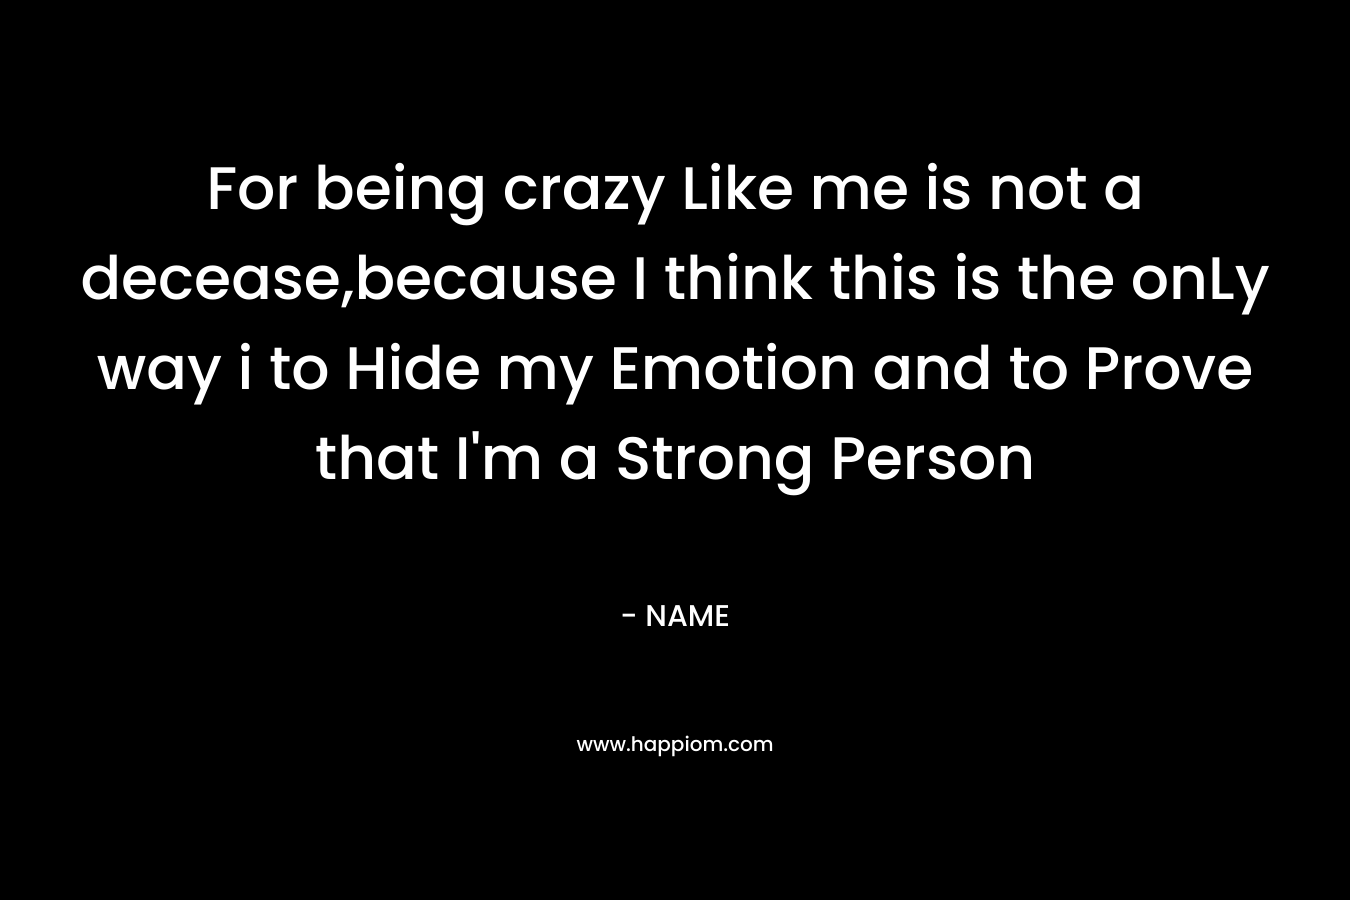 For being crazy Like me is not a decease,because I think this is the onLy way i to Hide my Emotion and to Prove that I’m a Strong Person – NAME